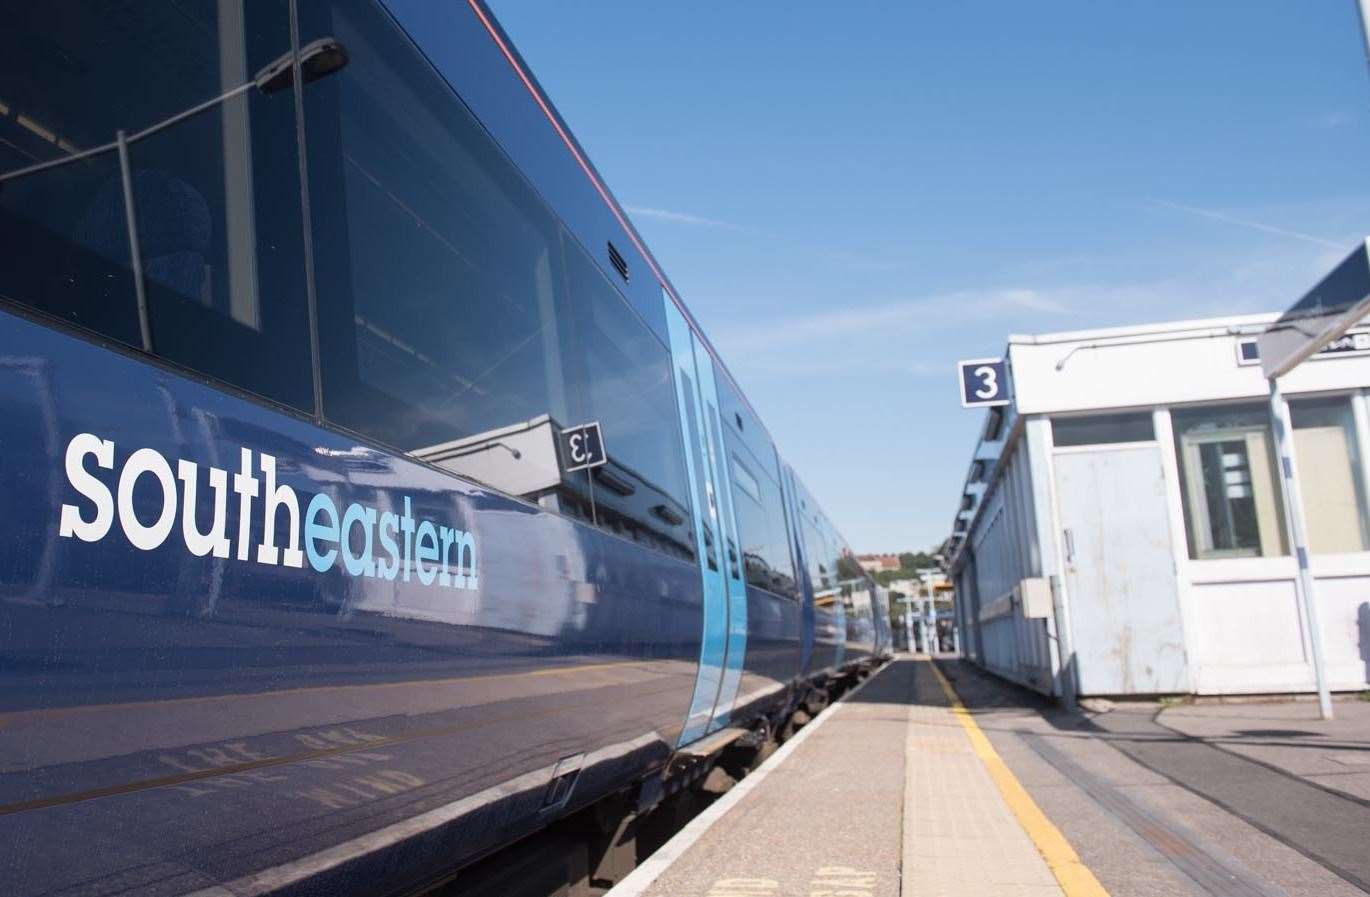 There are disruption to Southeastern services running between Dartford and London this morning